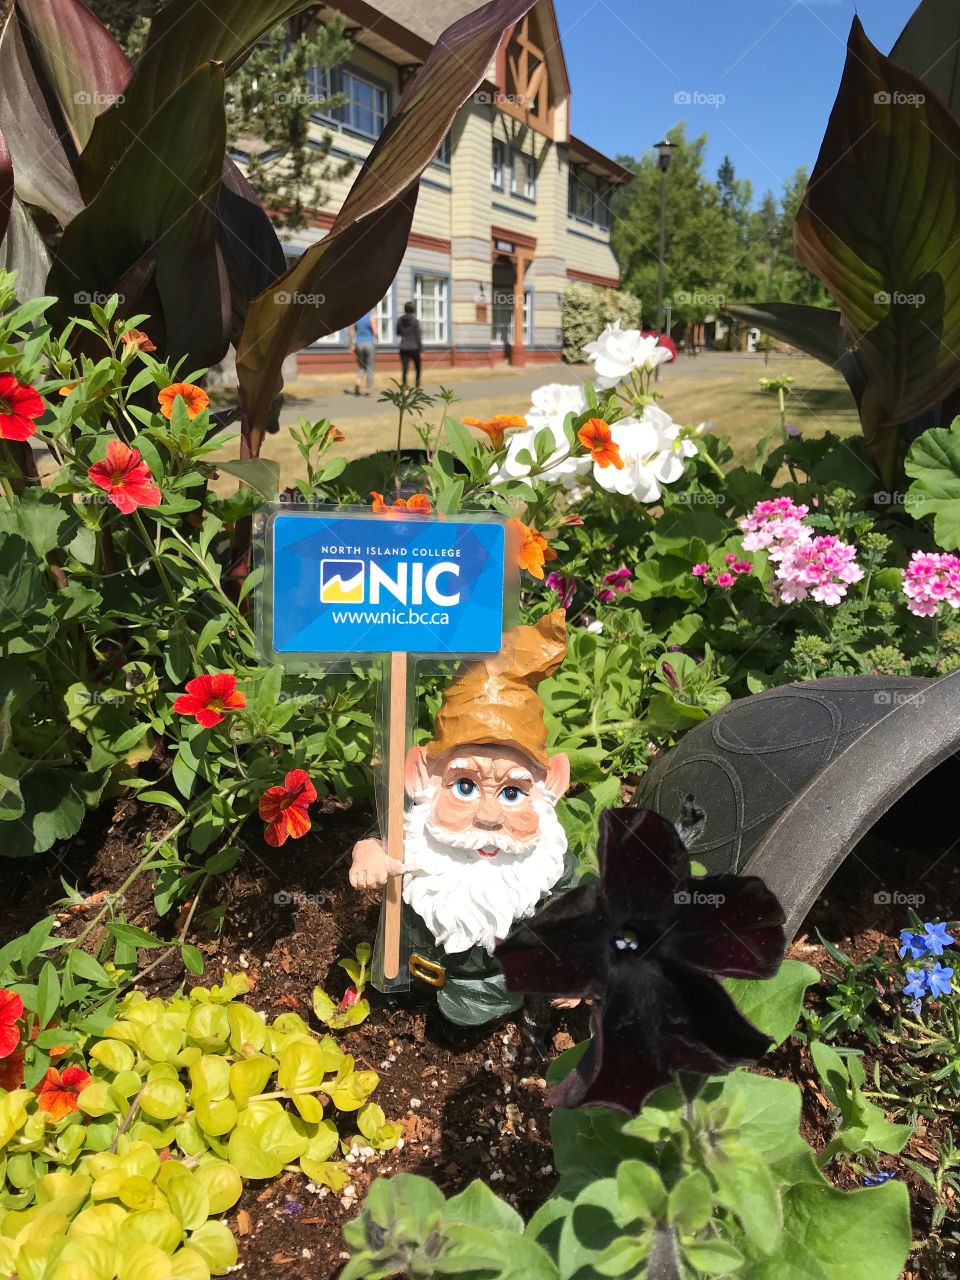 When the landscape professionals put in the new flowerbeds yesterday they added a little surprise for the students, the North Island College gnome